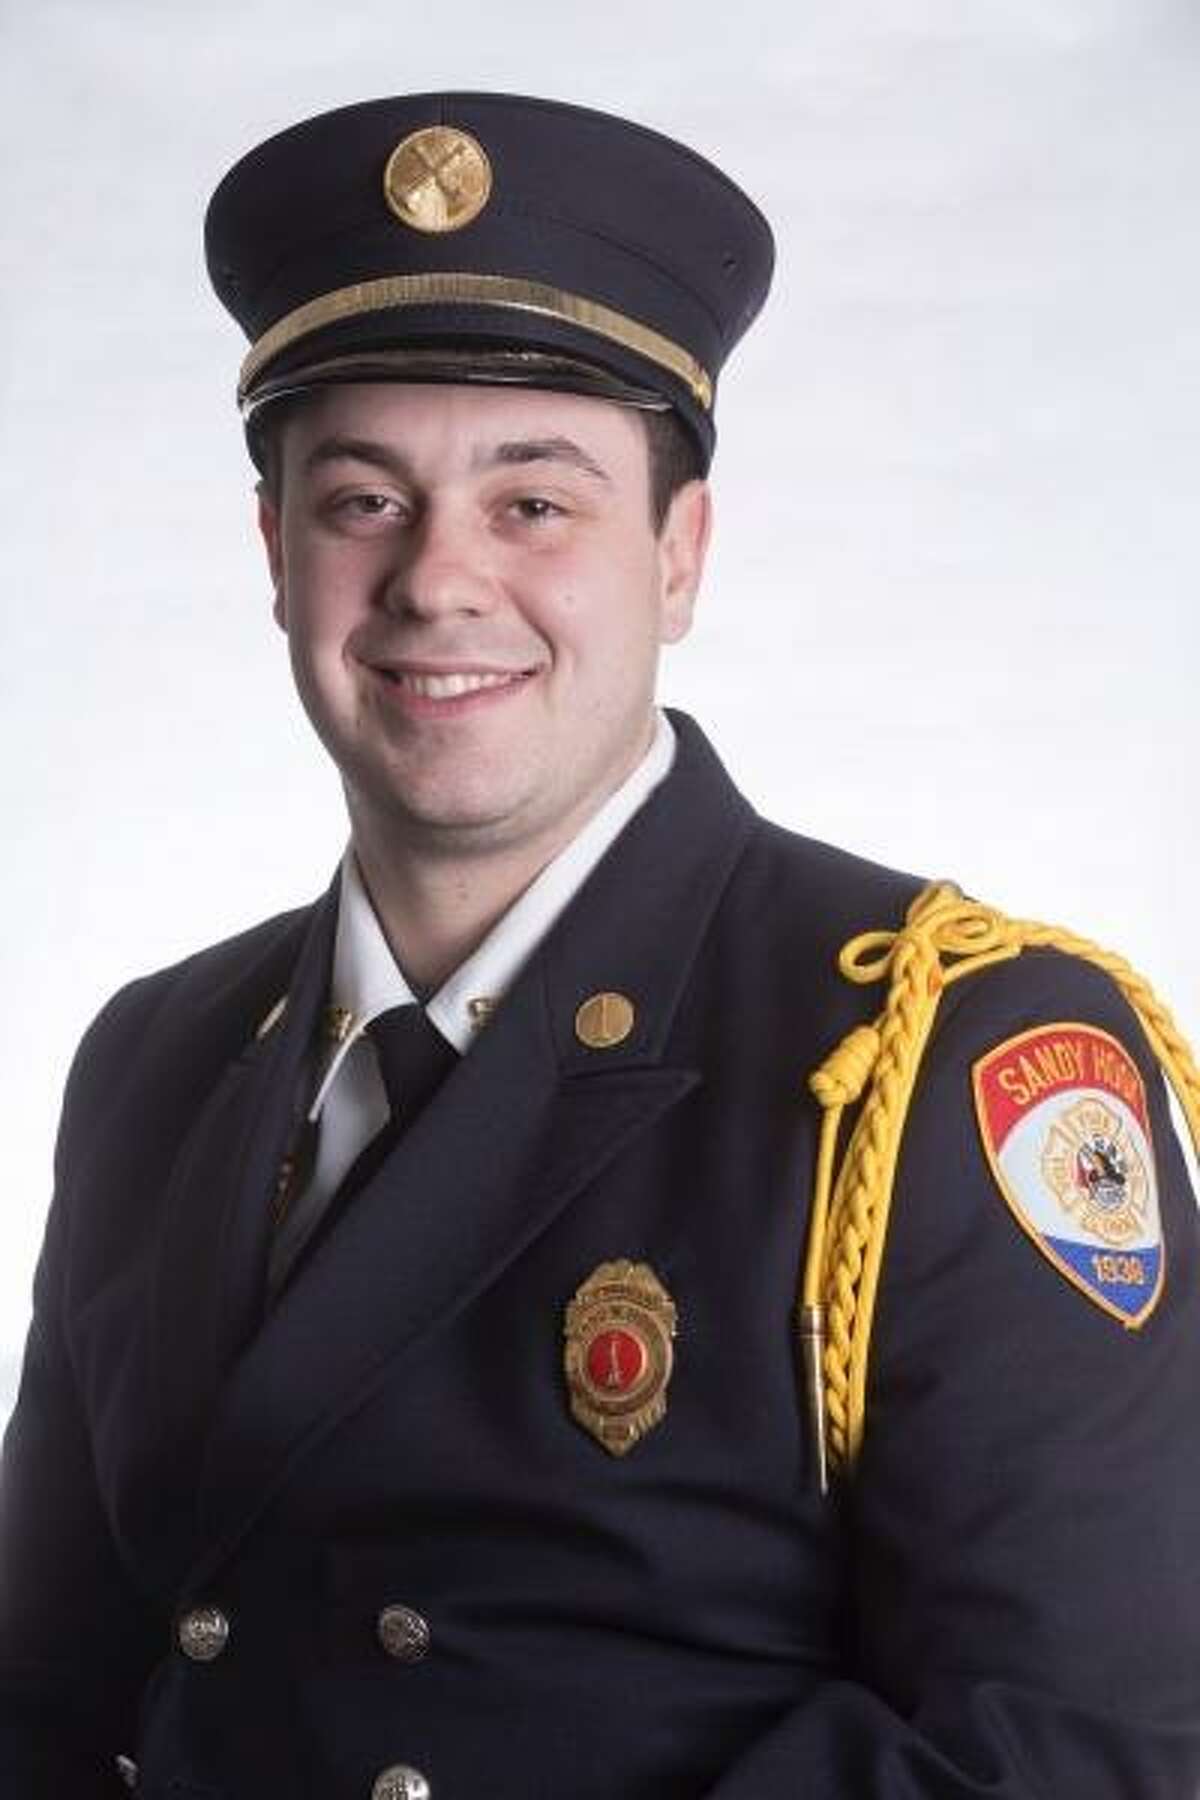 Sandy Hook Volunteer Fire & Rescue 2nd Assistant Chief Andy Ryan.